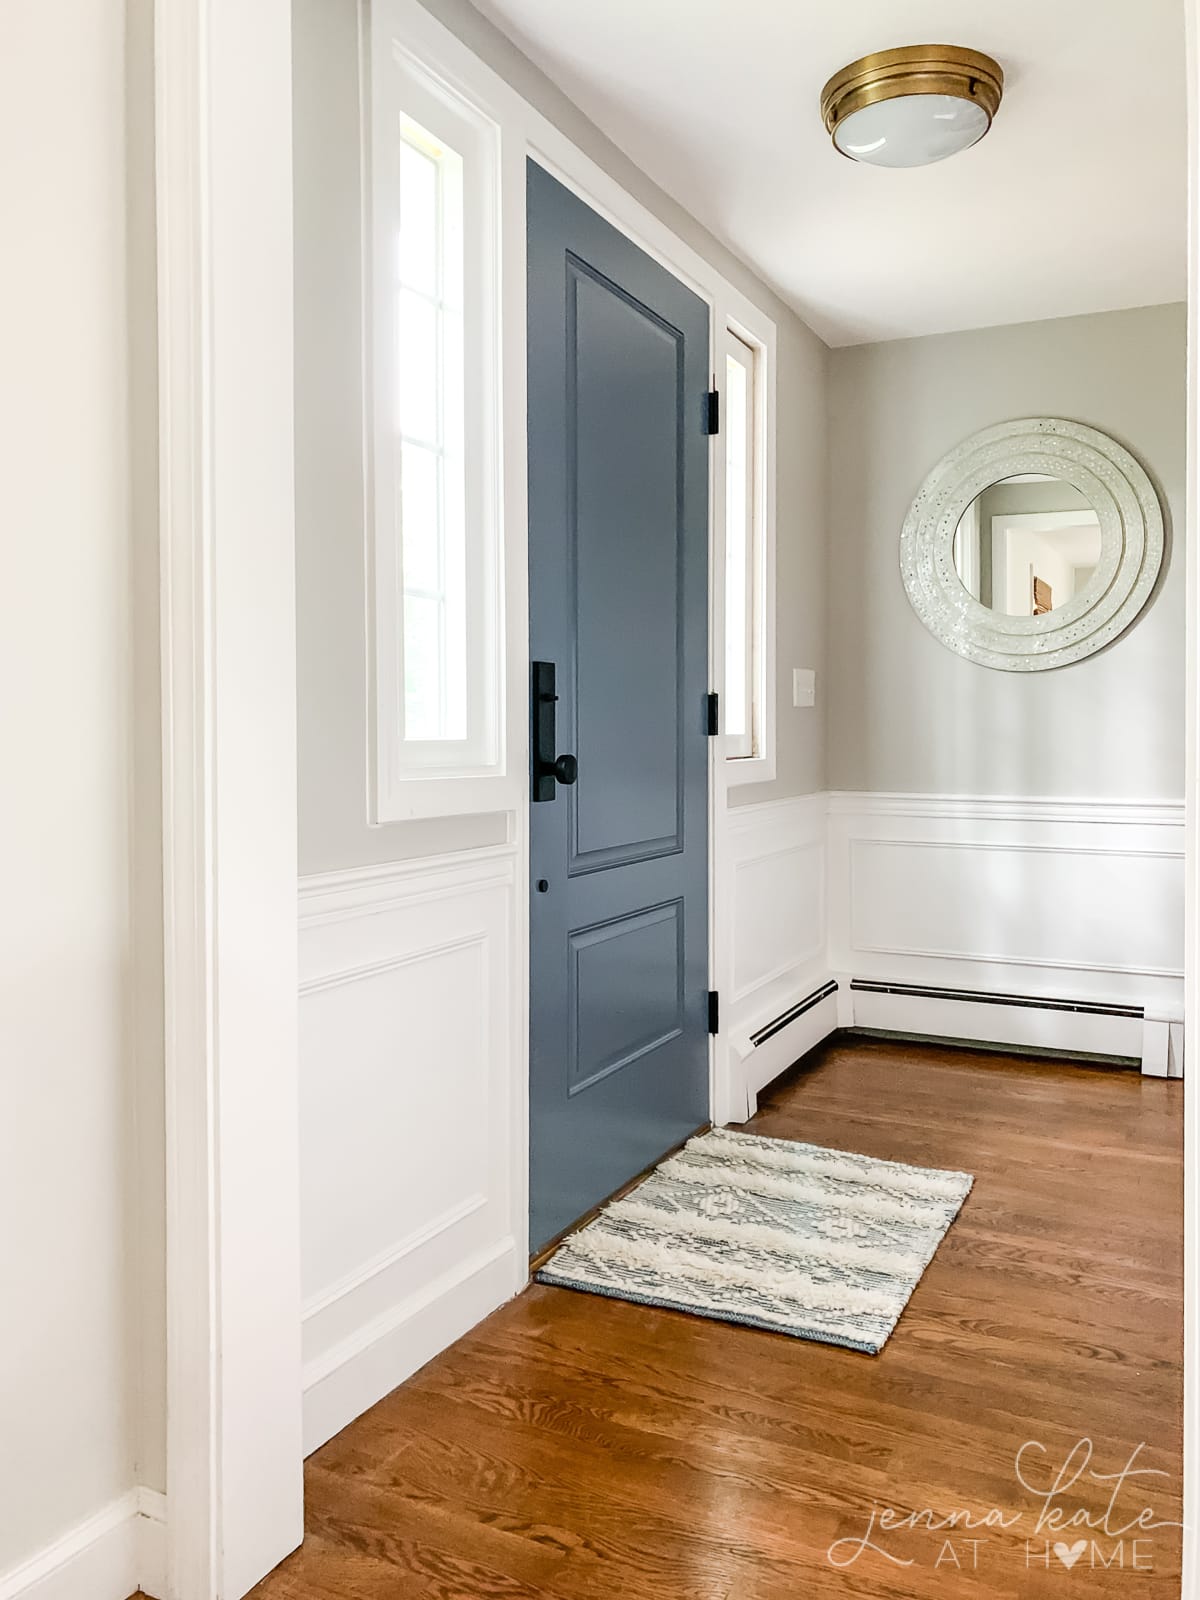 Sherwin Williams Repose Gray walls with extra white trim